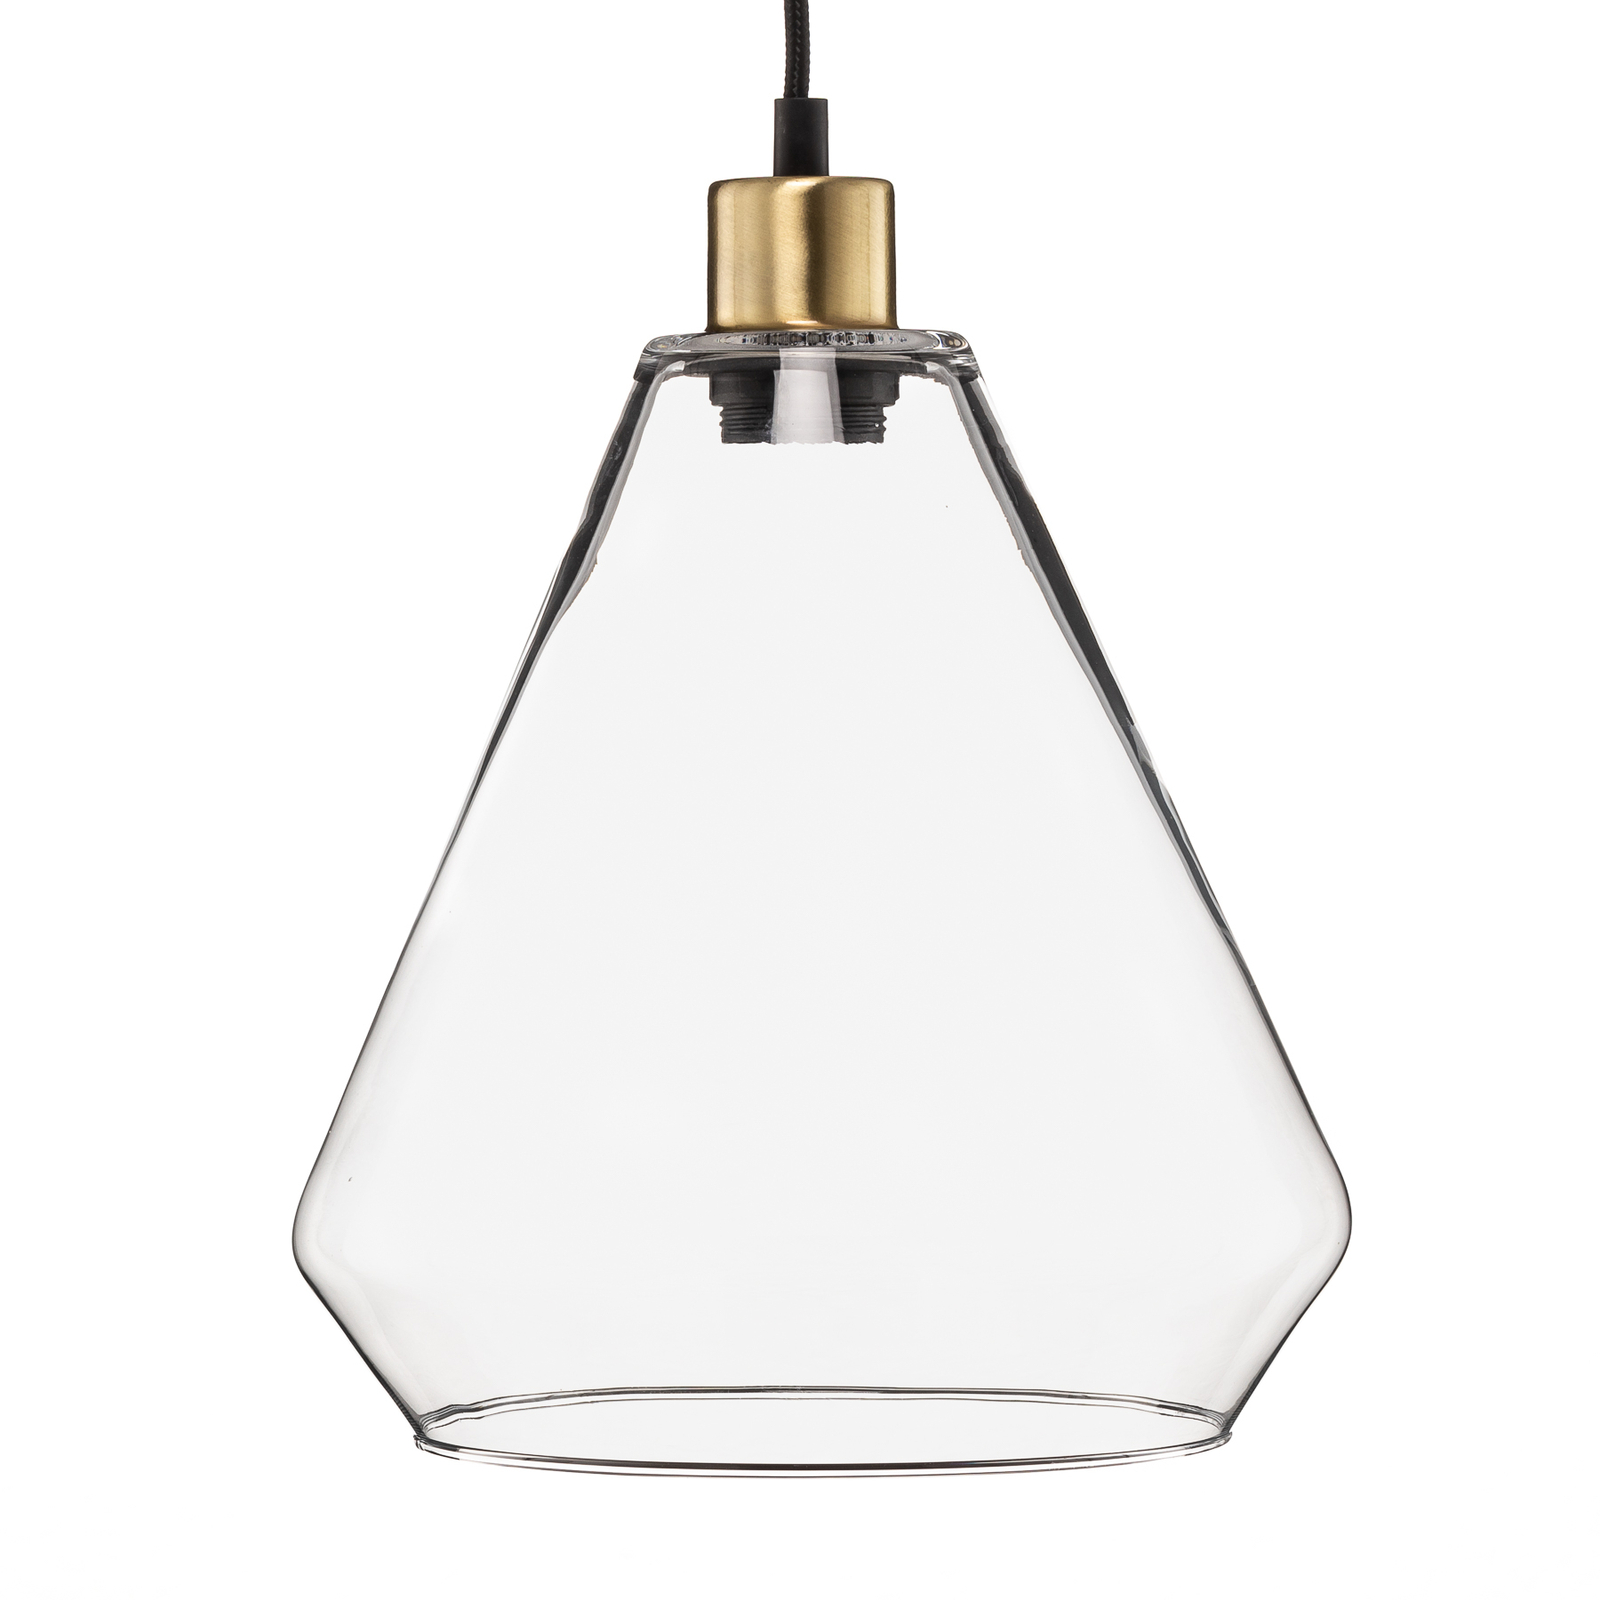 Lonceng pendant light made of clear hand-blown glass